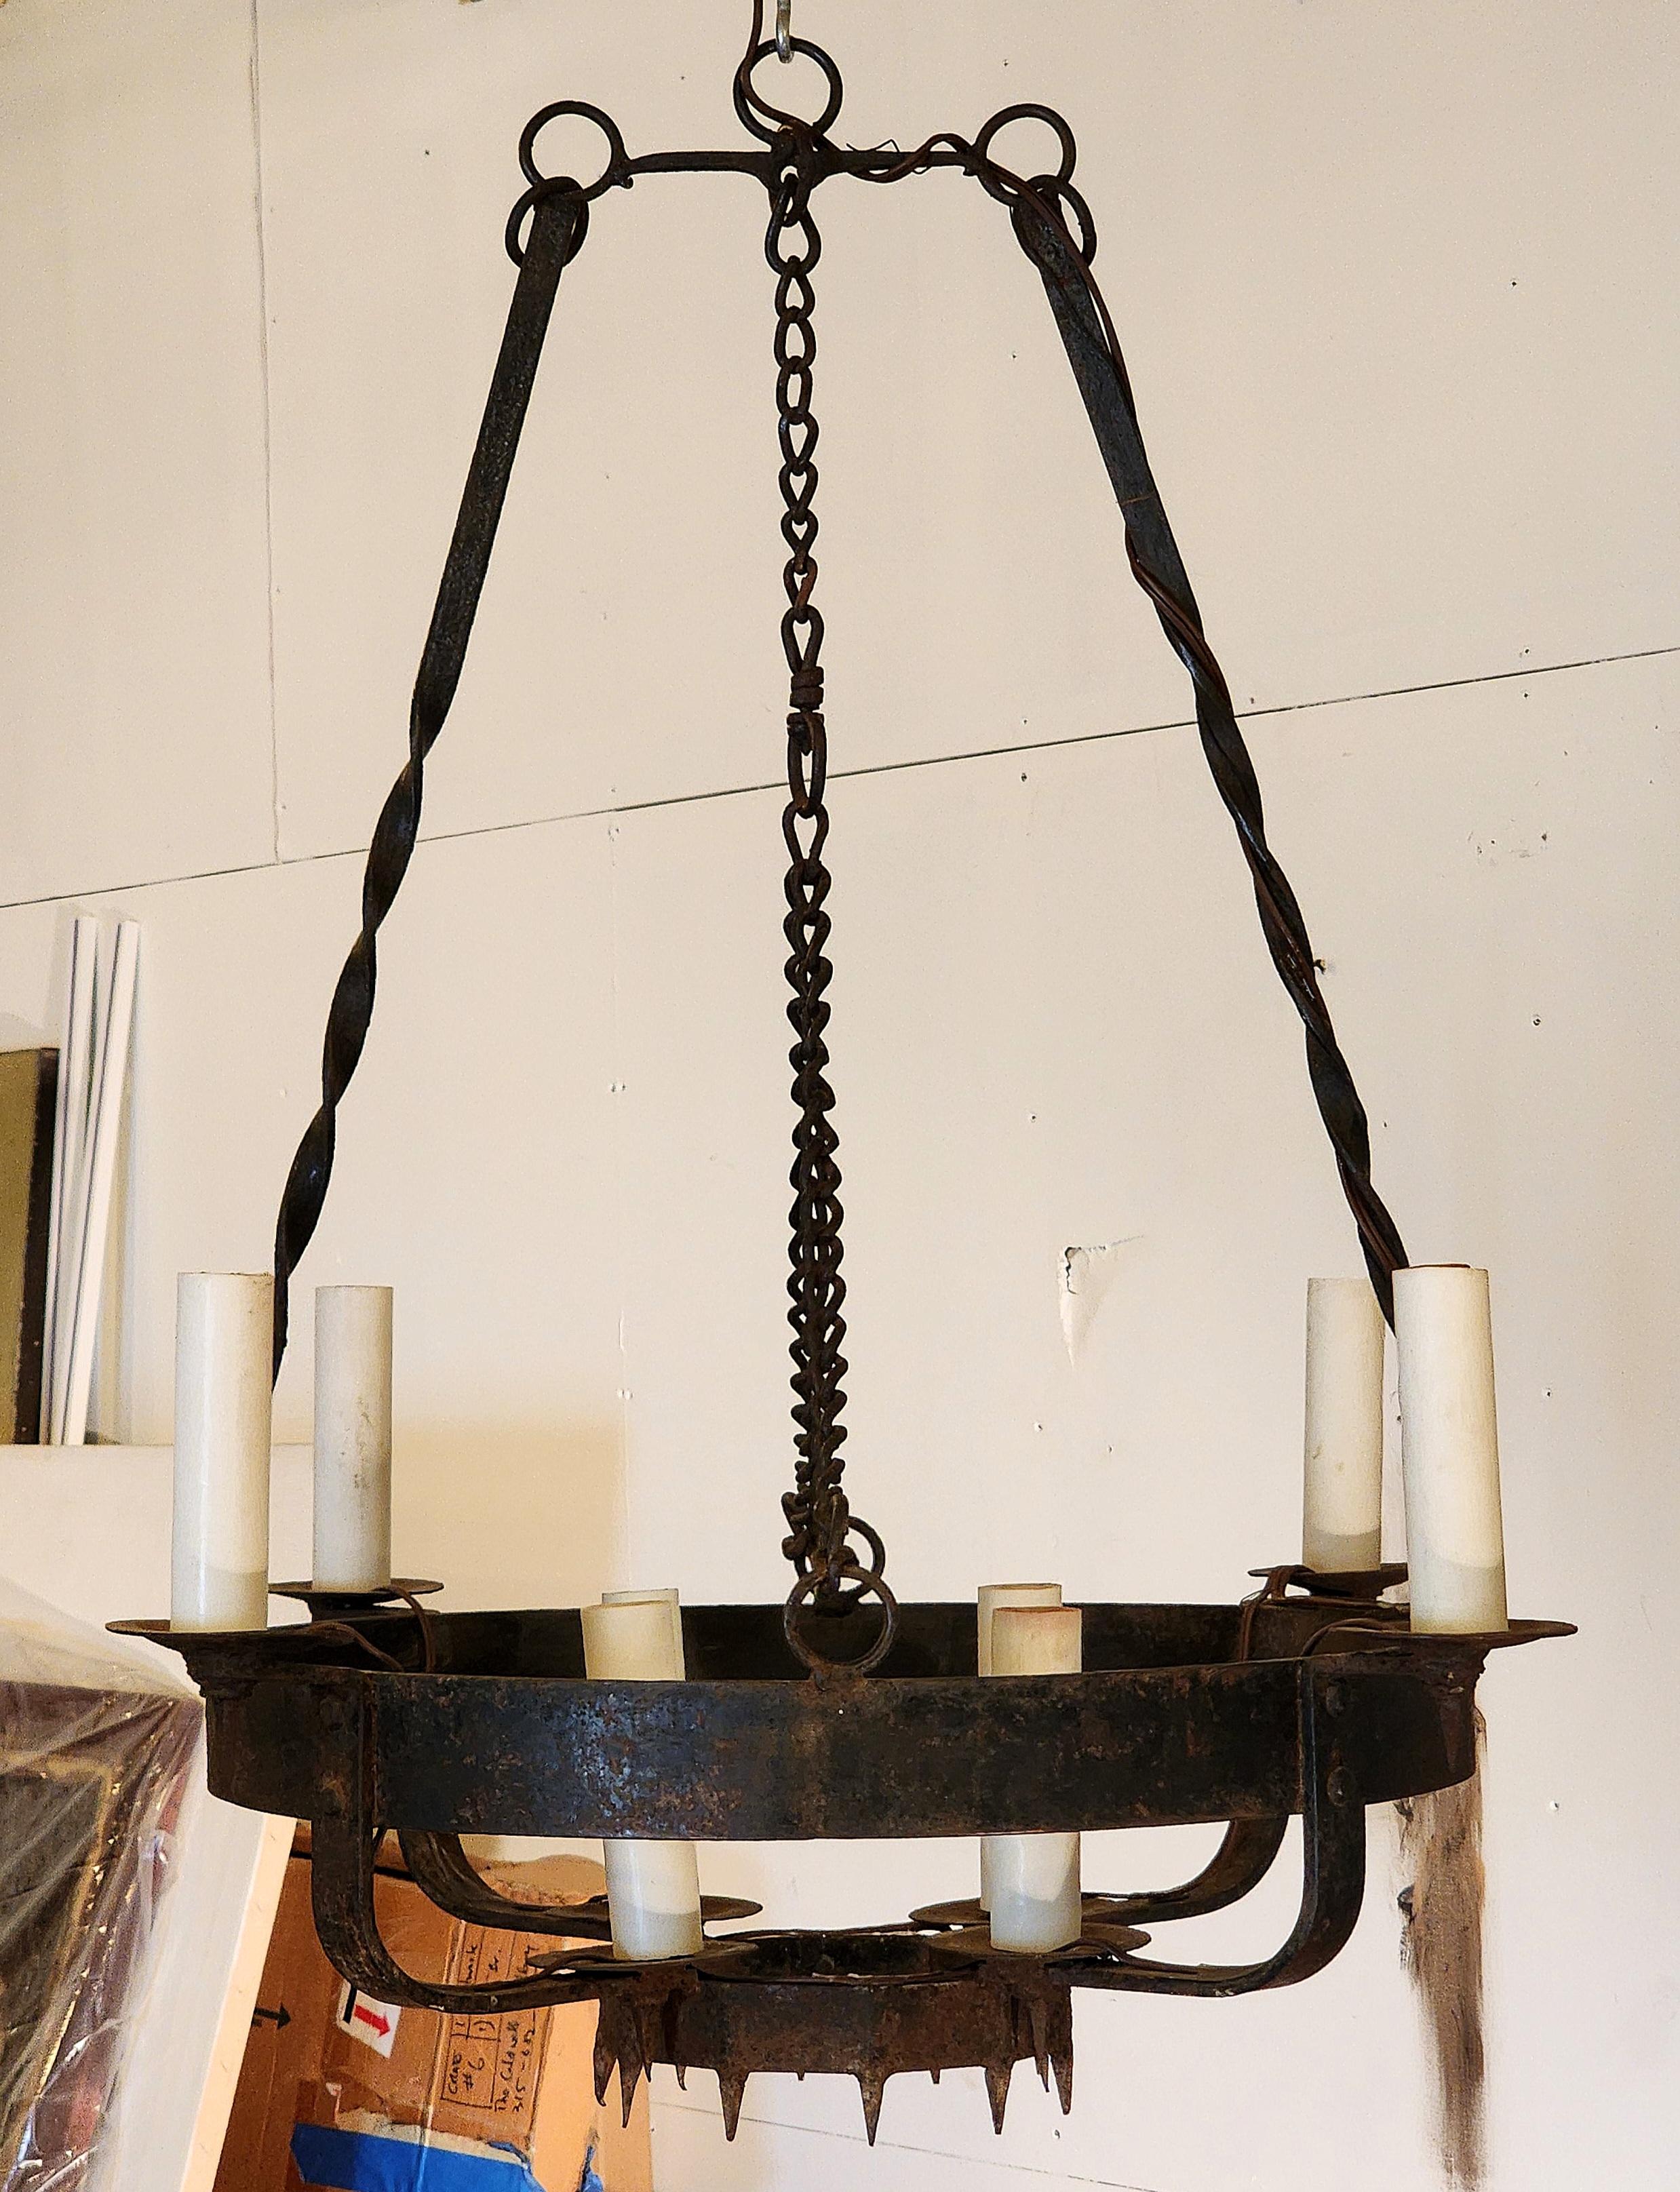 Well proportioned and beautifully made hand wrought iron Chandelier in the Arts and Crafts Style with many details. Has been electrified to hold eight chandelier size bulbs. This item can add character to any interior space or exterior. The